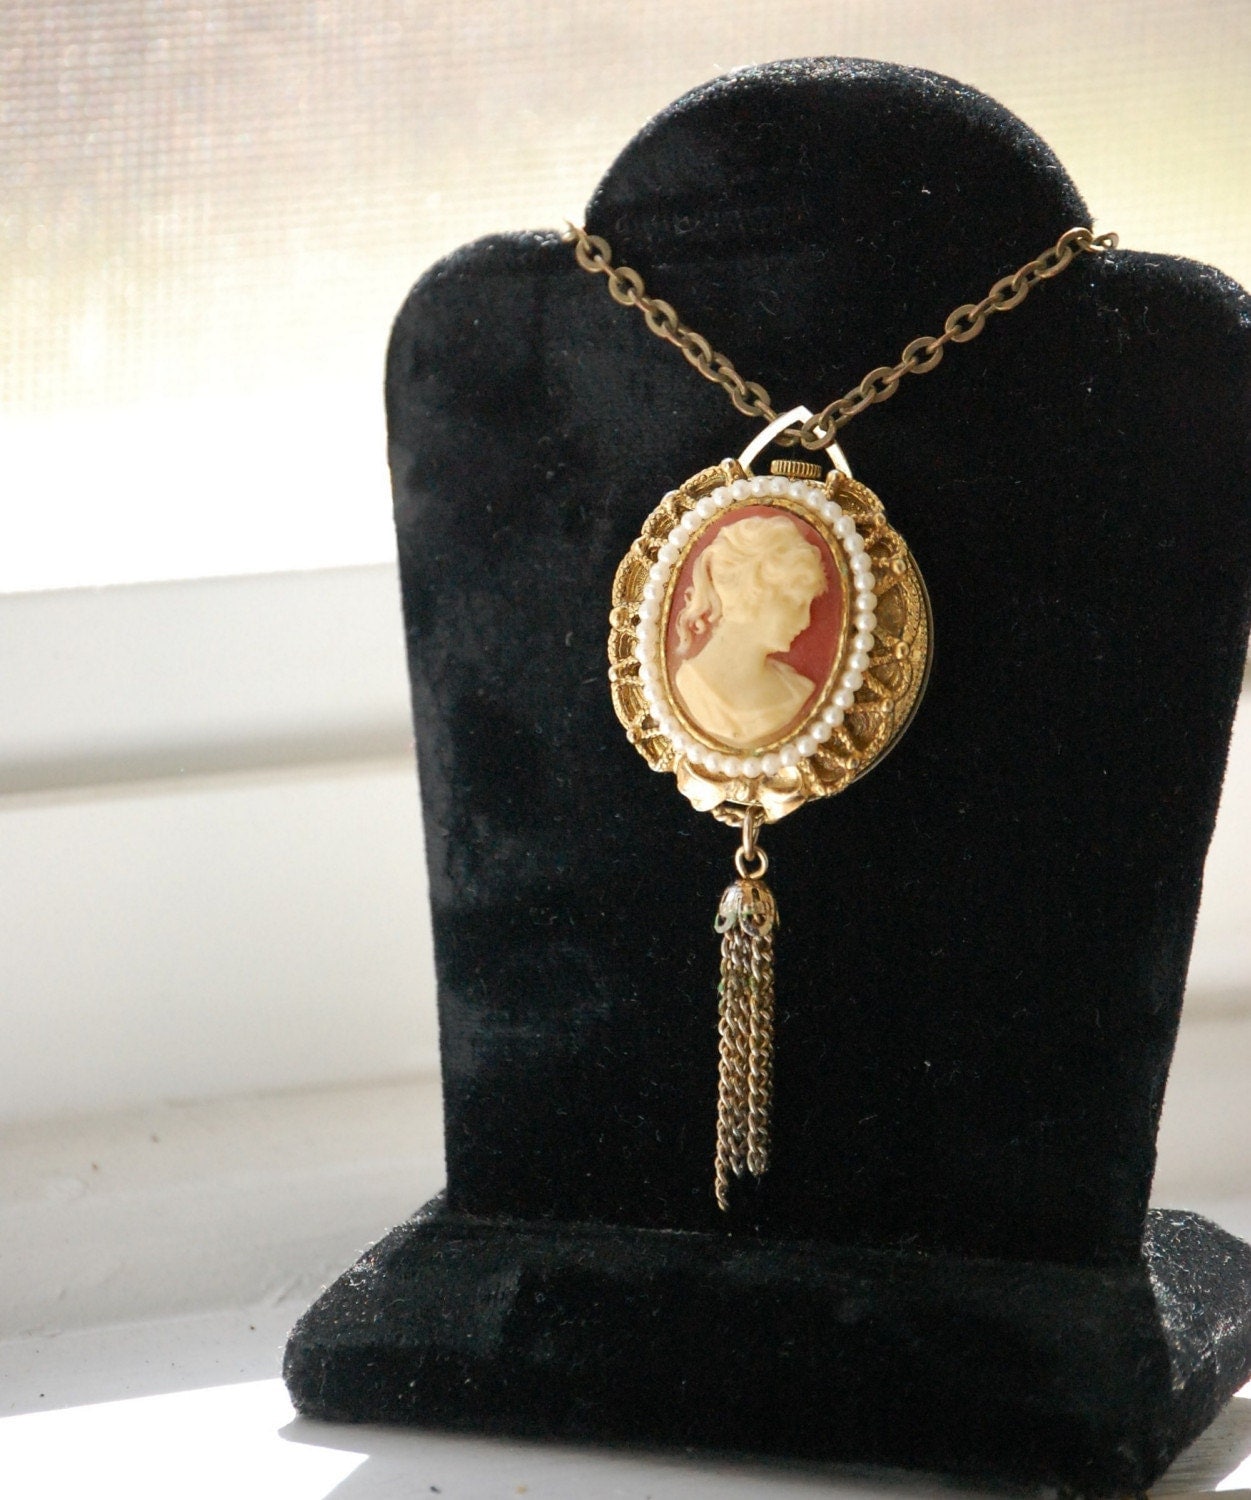 Vintage Lucerne Cameo Watch Pendant FREE SHIPPING ANYWHERE